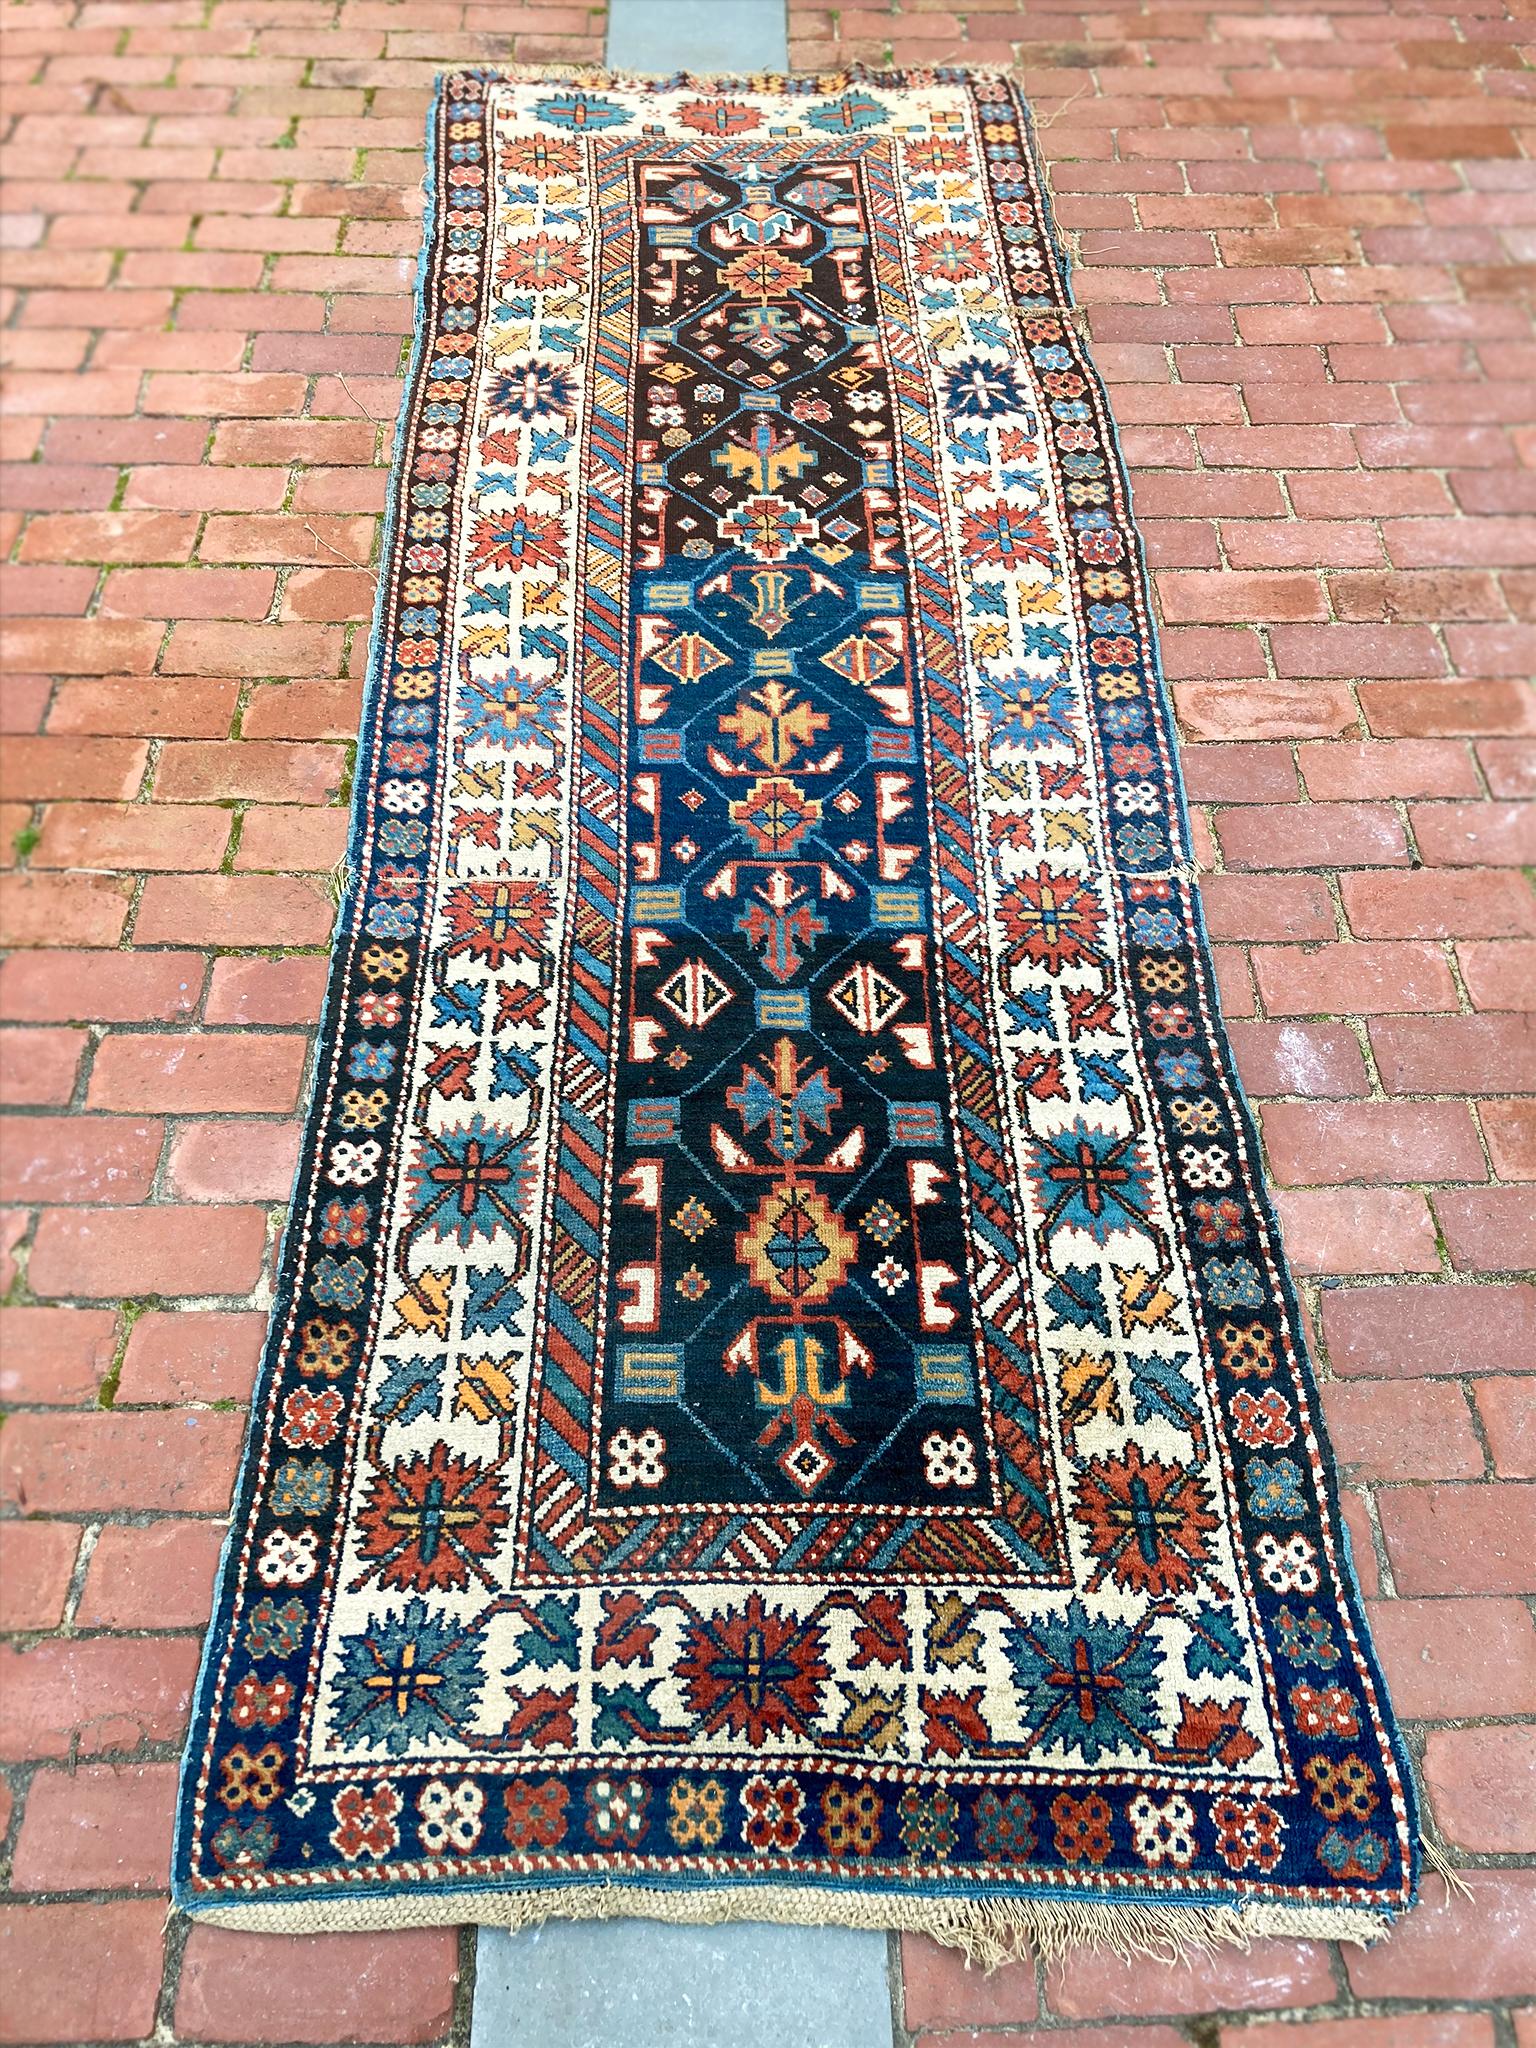 This 1920s Kazak runner rug has a vibrant palette that consists of red, ocher yellow, navy and light blues, and ivory. These colors are arranged intricately in stylized floral and geometric patterns. The rug has been professionally cleaned.